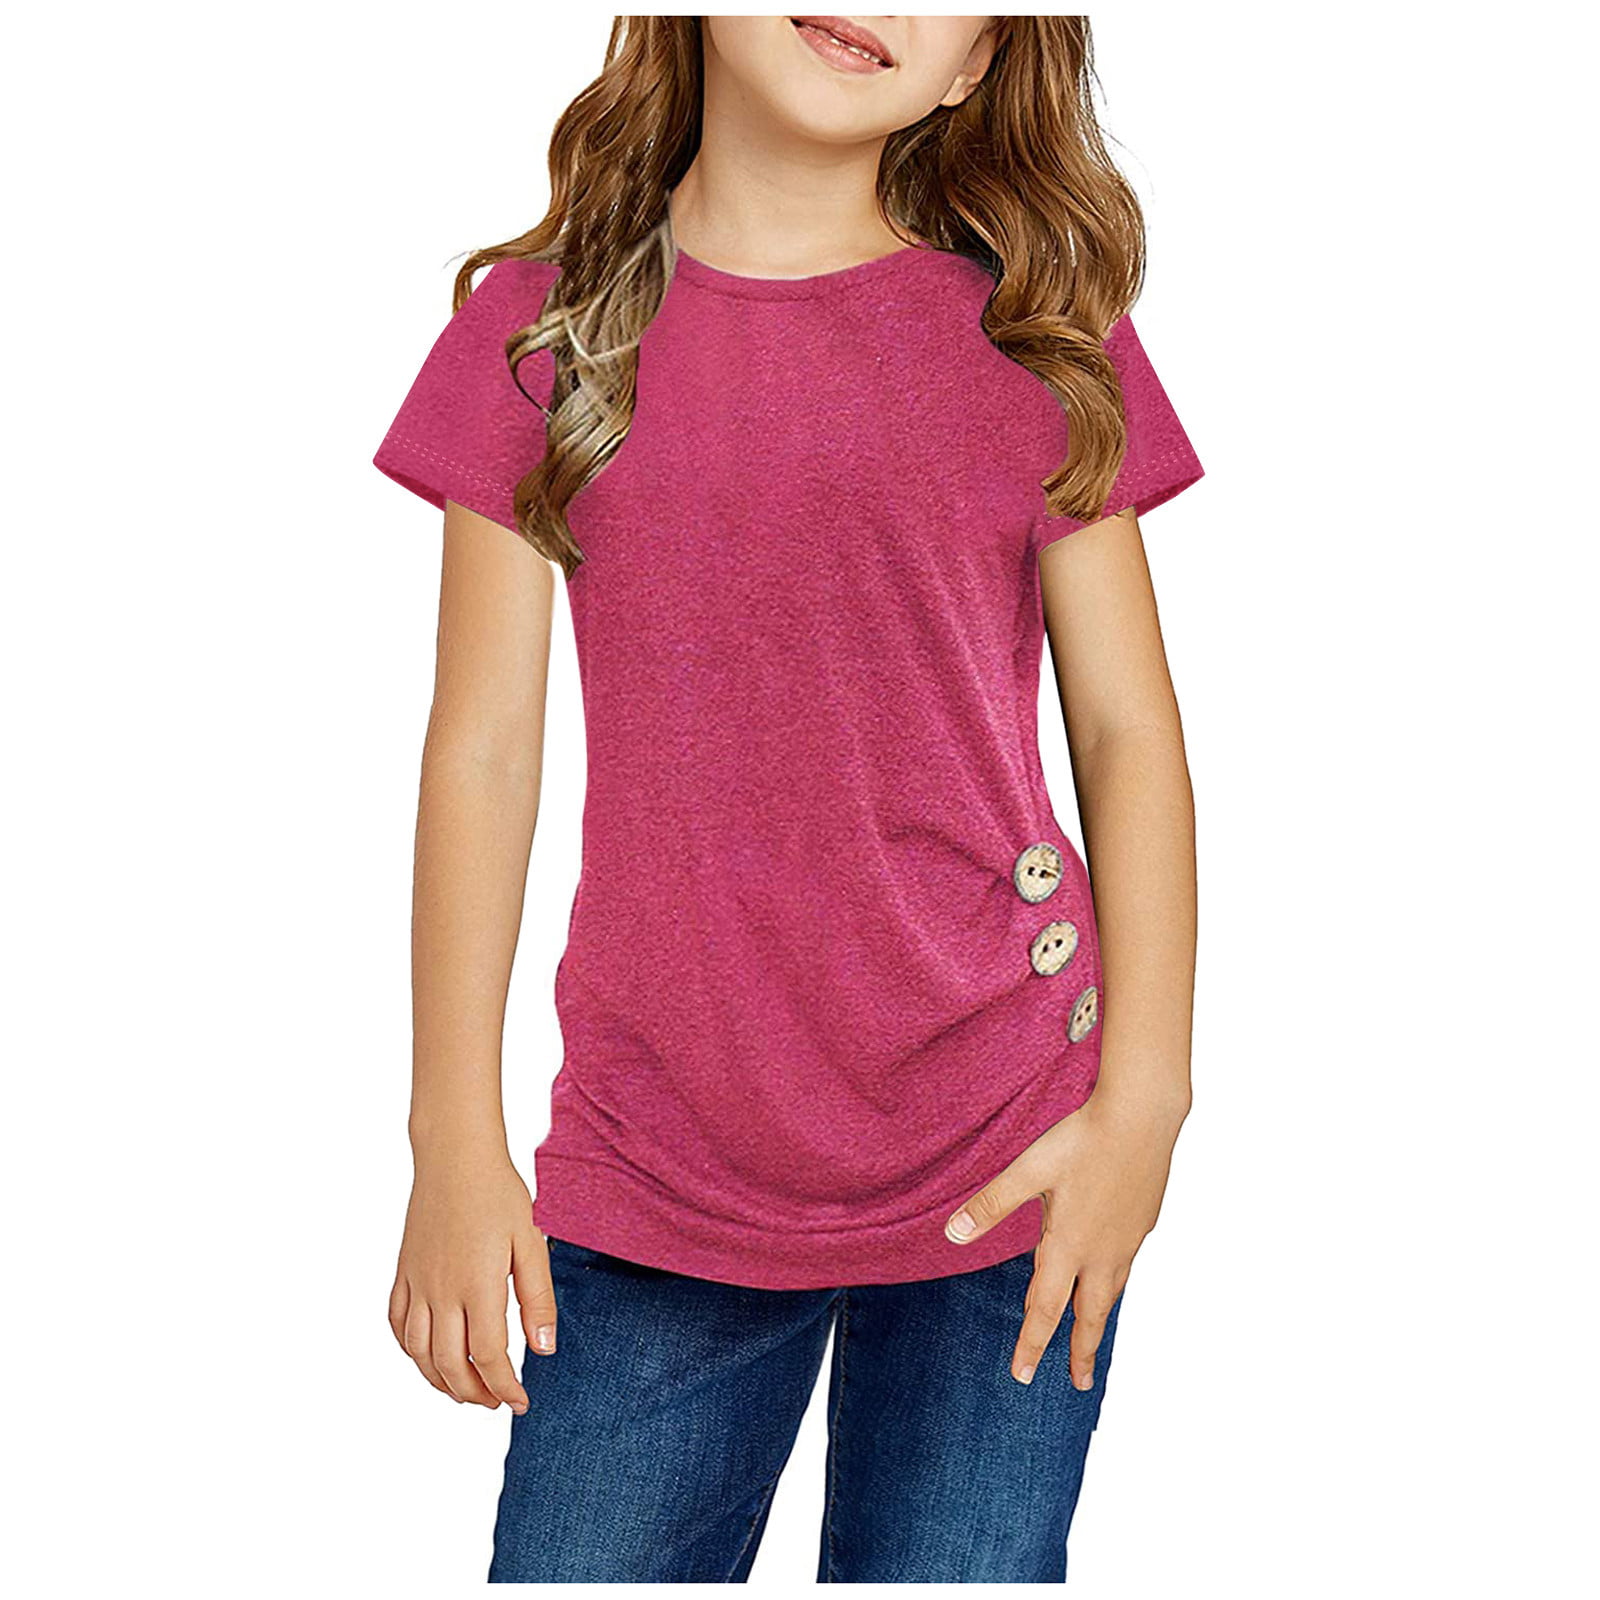 Yobecho Girl Kids Summer Tie Front Knot Short Sleeve Shirts Button Up Cute Tunic Tops Blouse